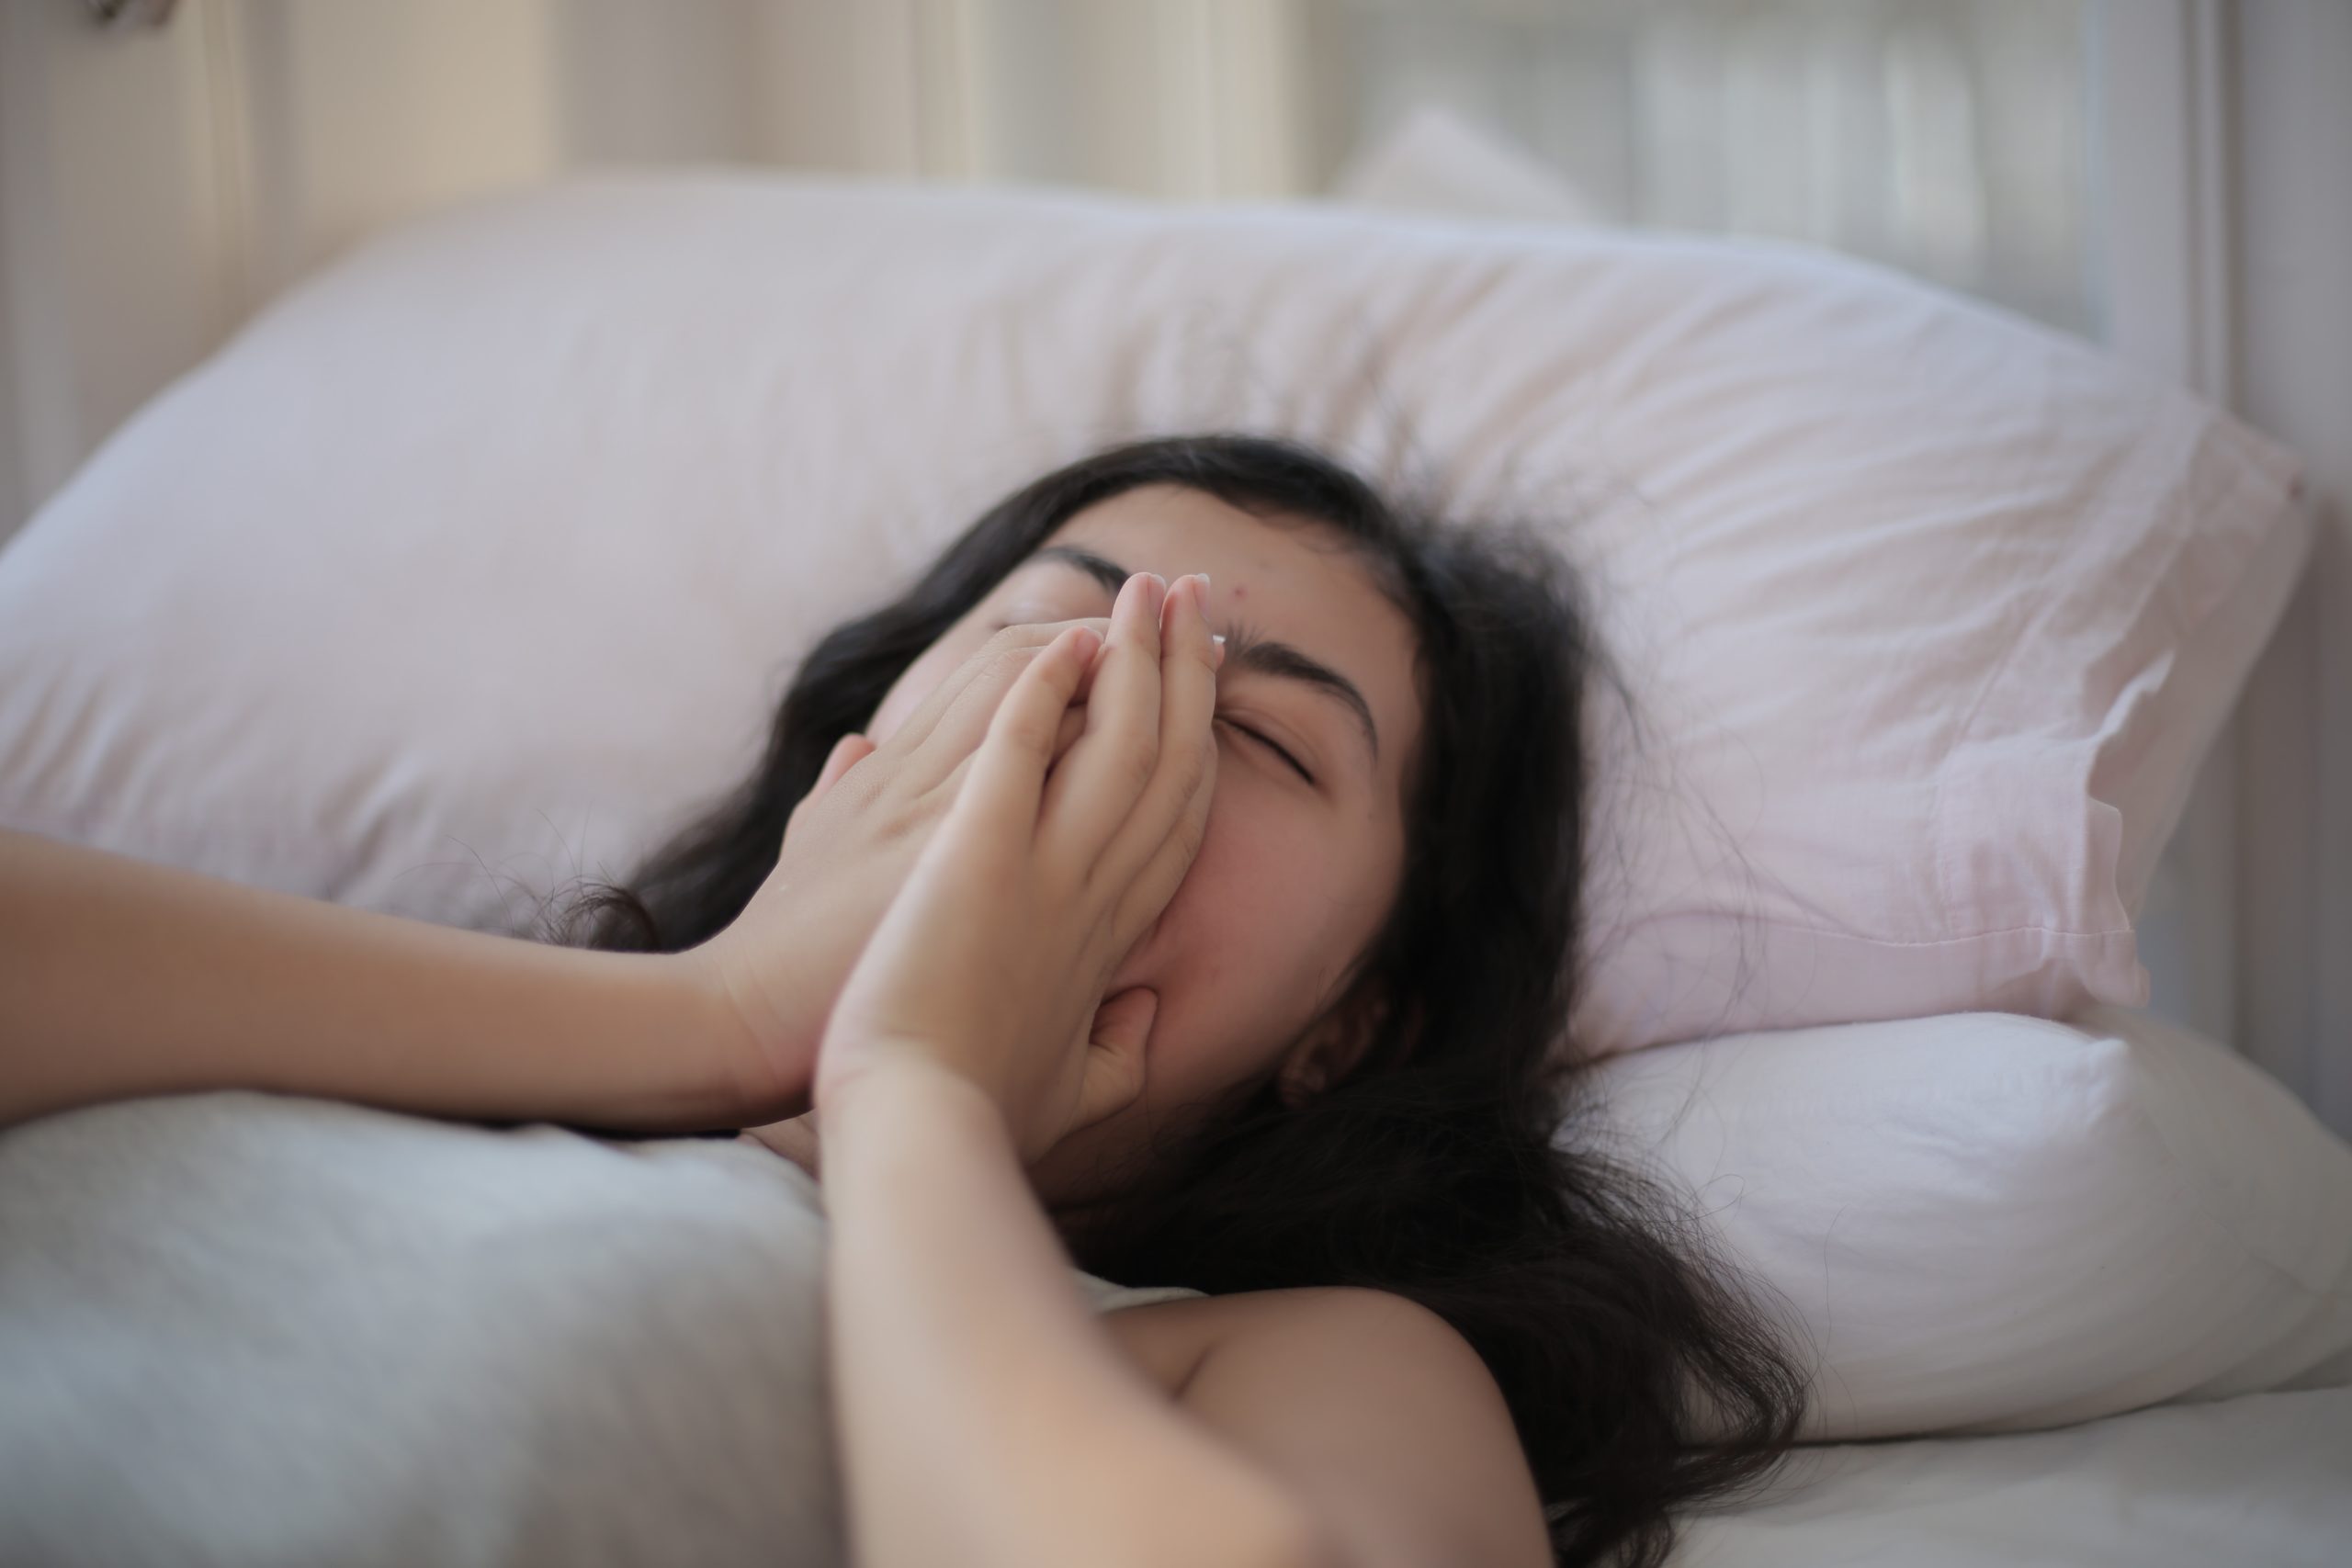 A girl asleep in bed, her hands covering her mouth.